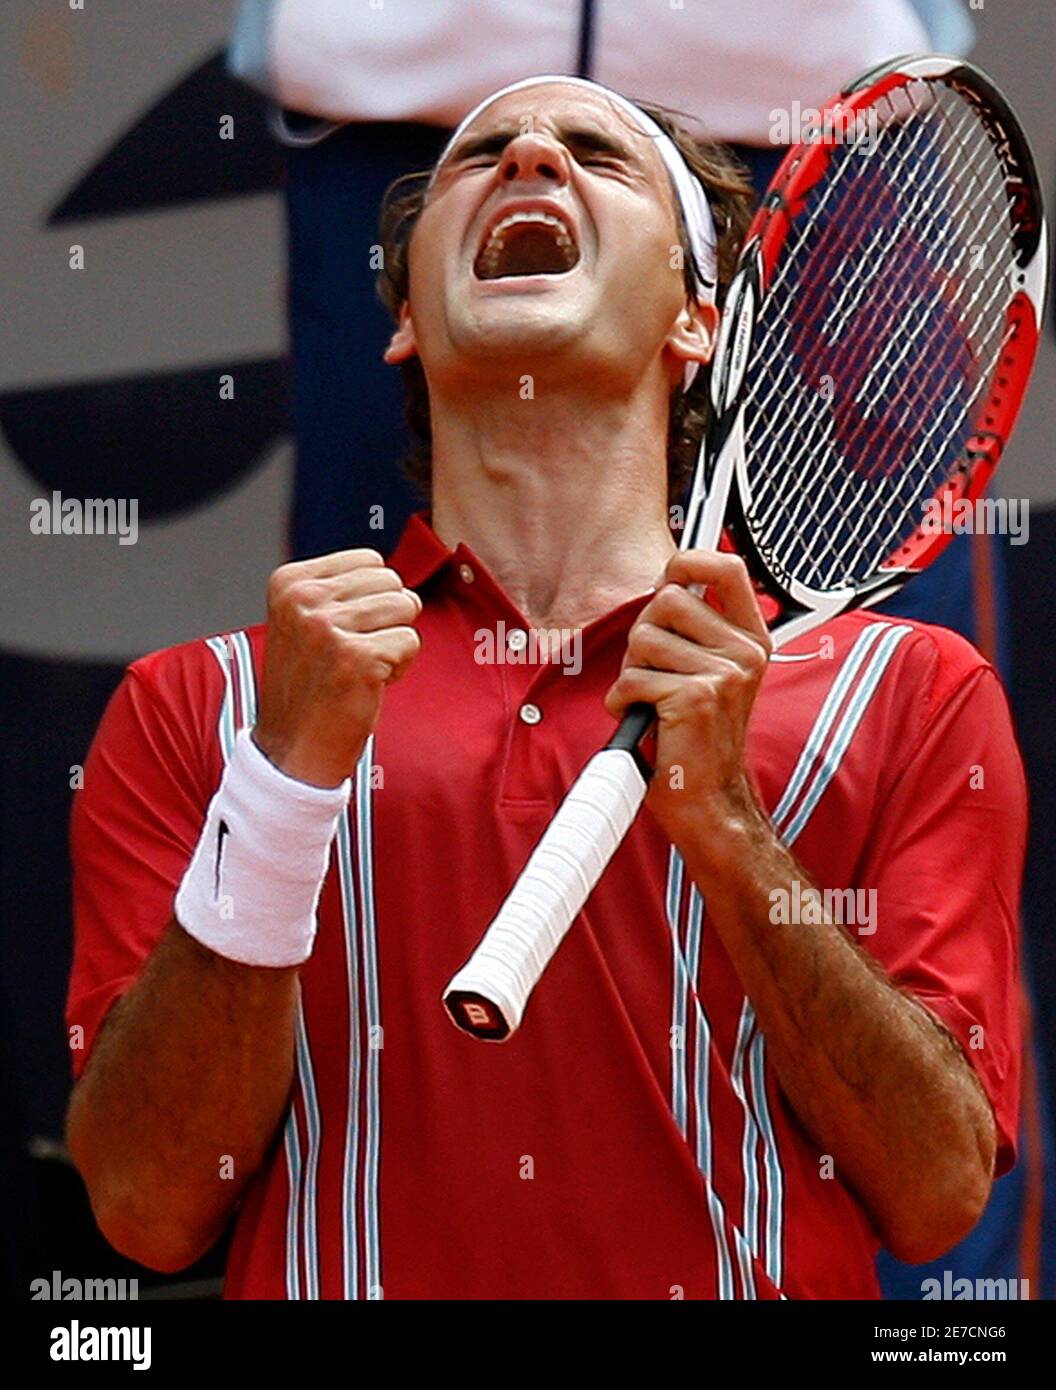 Switzerland's Roger Federer celebrates after defeating Spain's Rafael Nadal  in a final match at the Hamburg